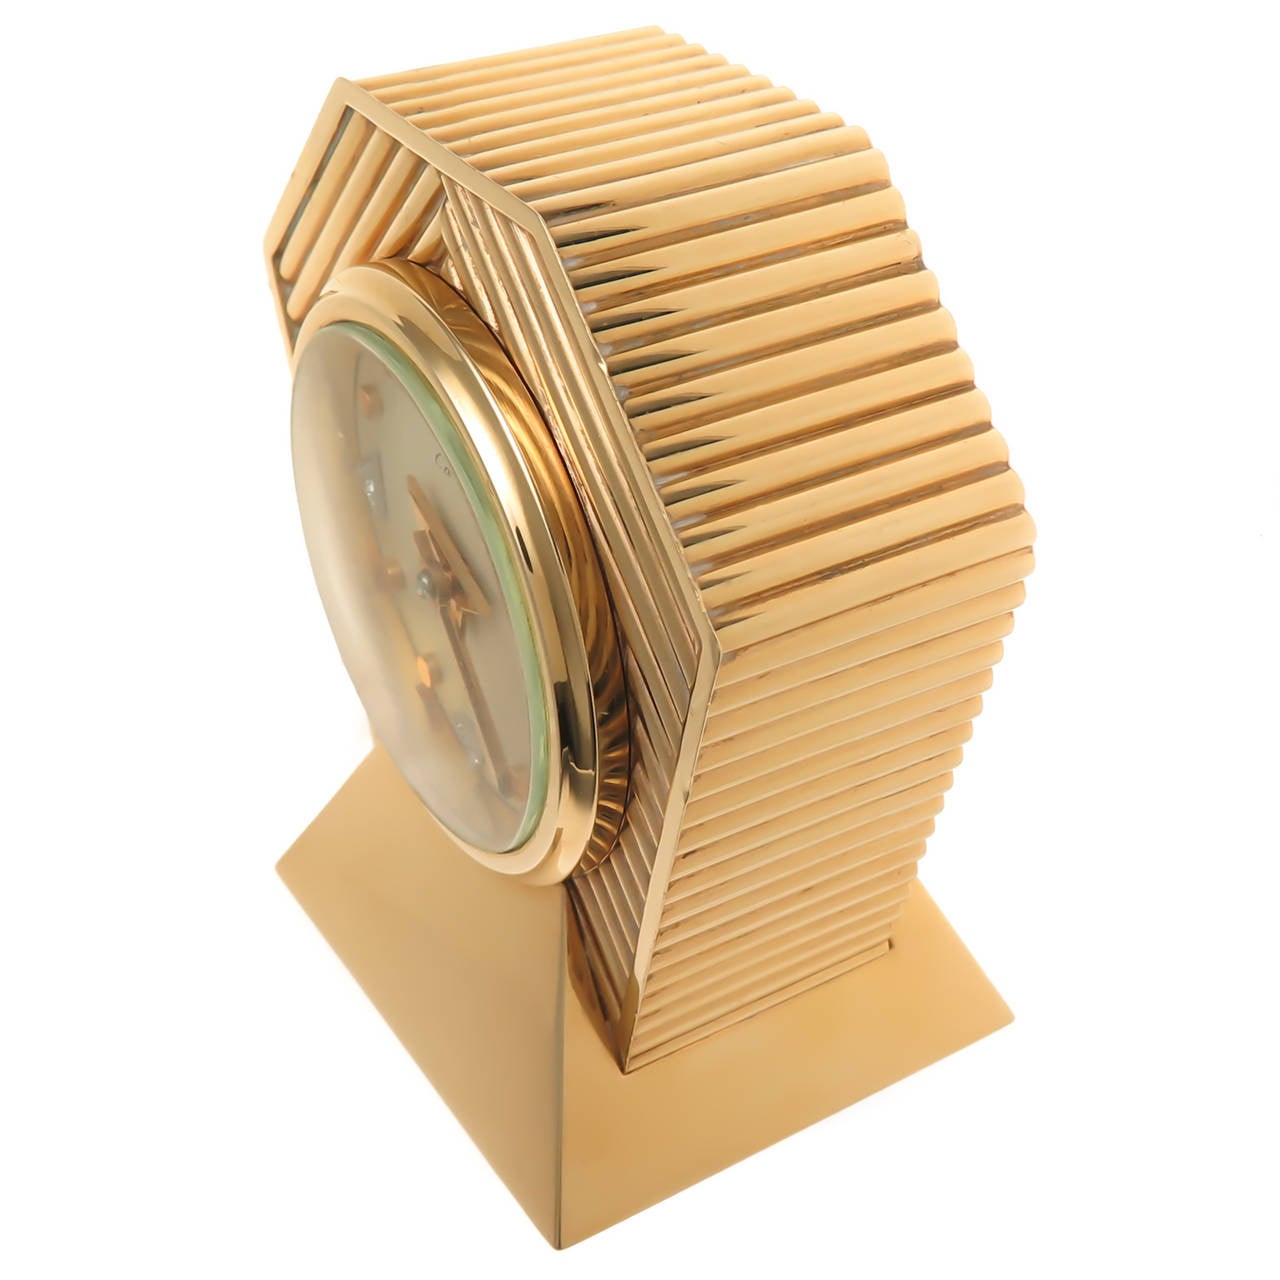 Circa 1953 Cartier 14K Yellow Gold Desk Clock. Art Deco, Streamlined Ribbed Case, Concord, Manual Wind Movement. Cream Color Dial with Raised Gold Button Markers and Diamond Set markers.Gold Arrow Shape Hands with a Diamond set in the center. Signed